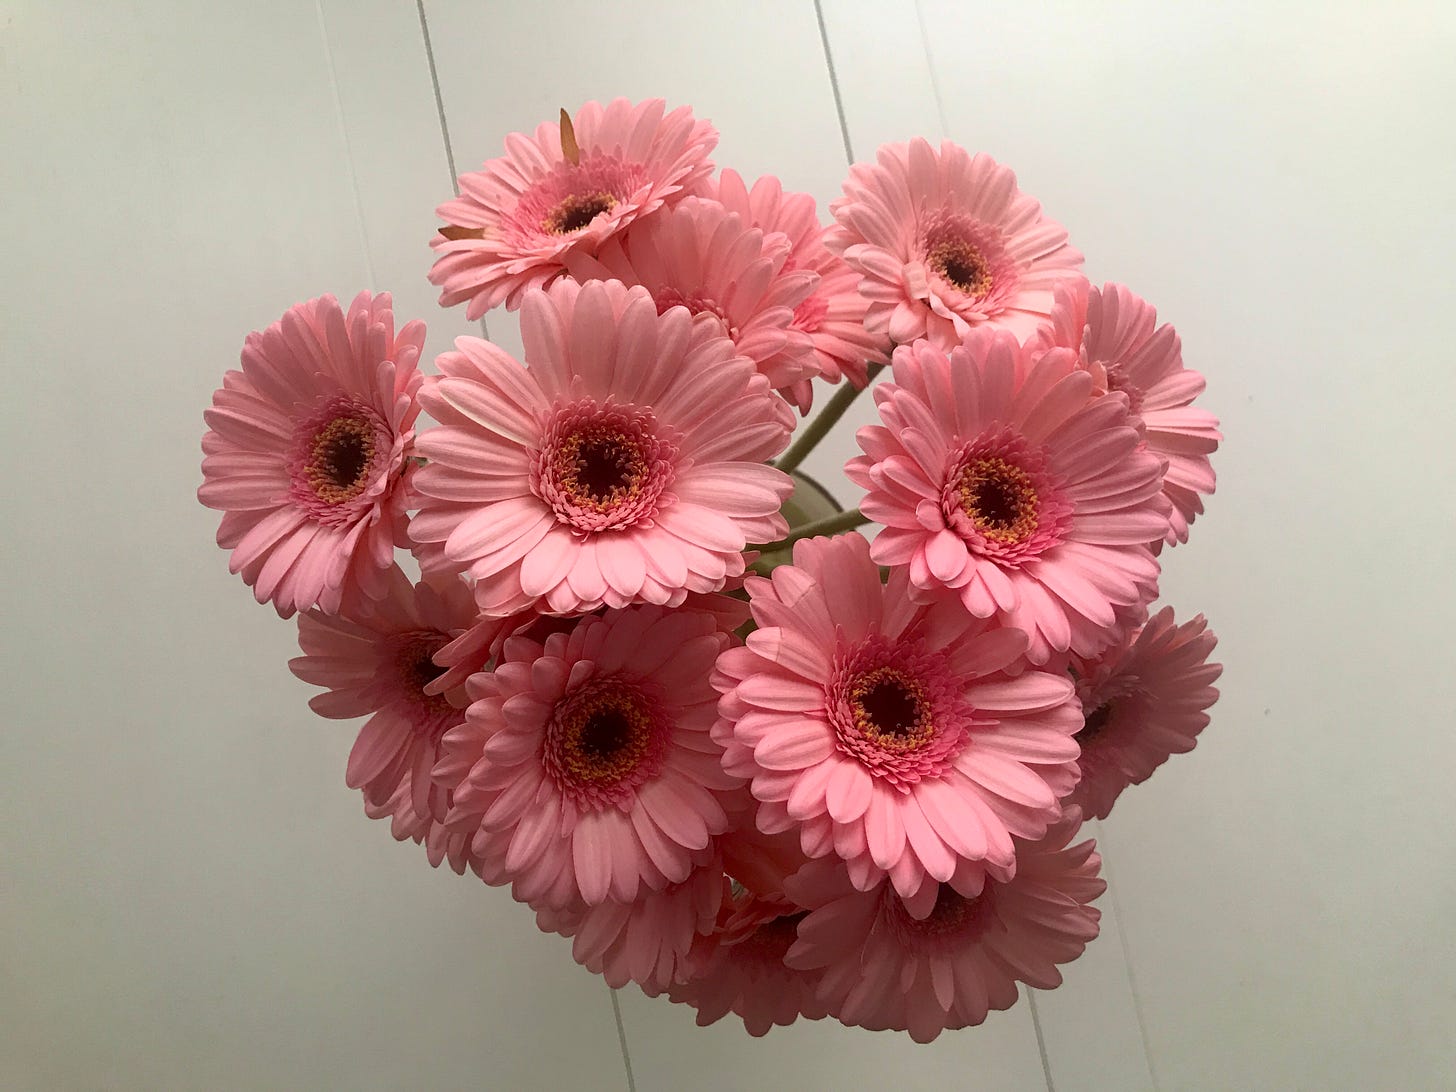 A direct overhead view of a bouquet of large pink daisies in a vase on a white table